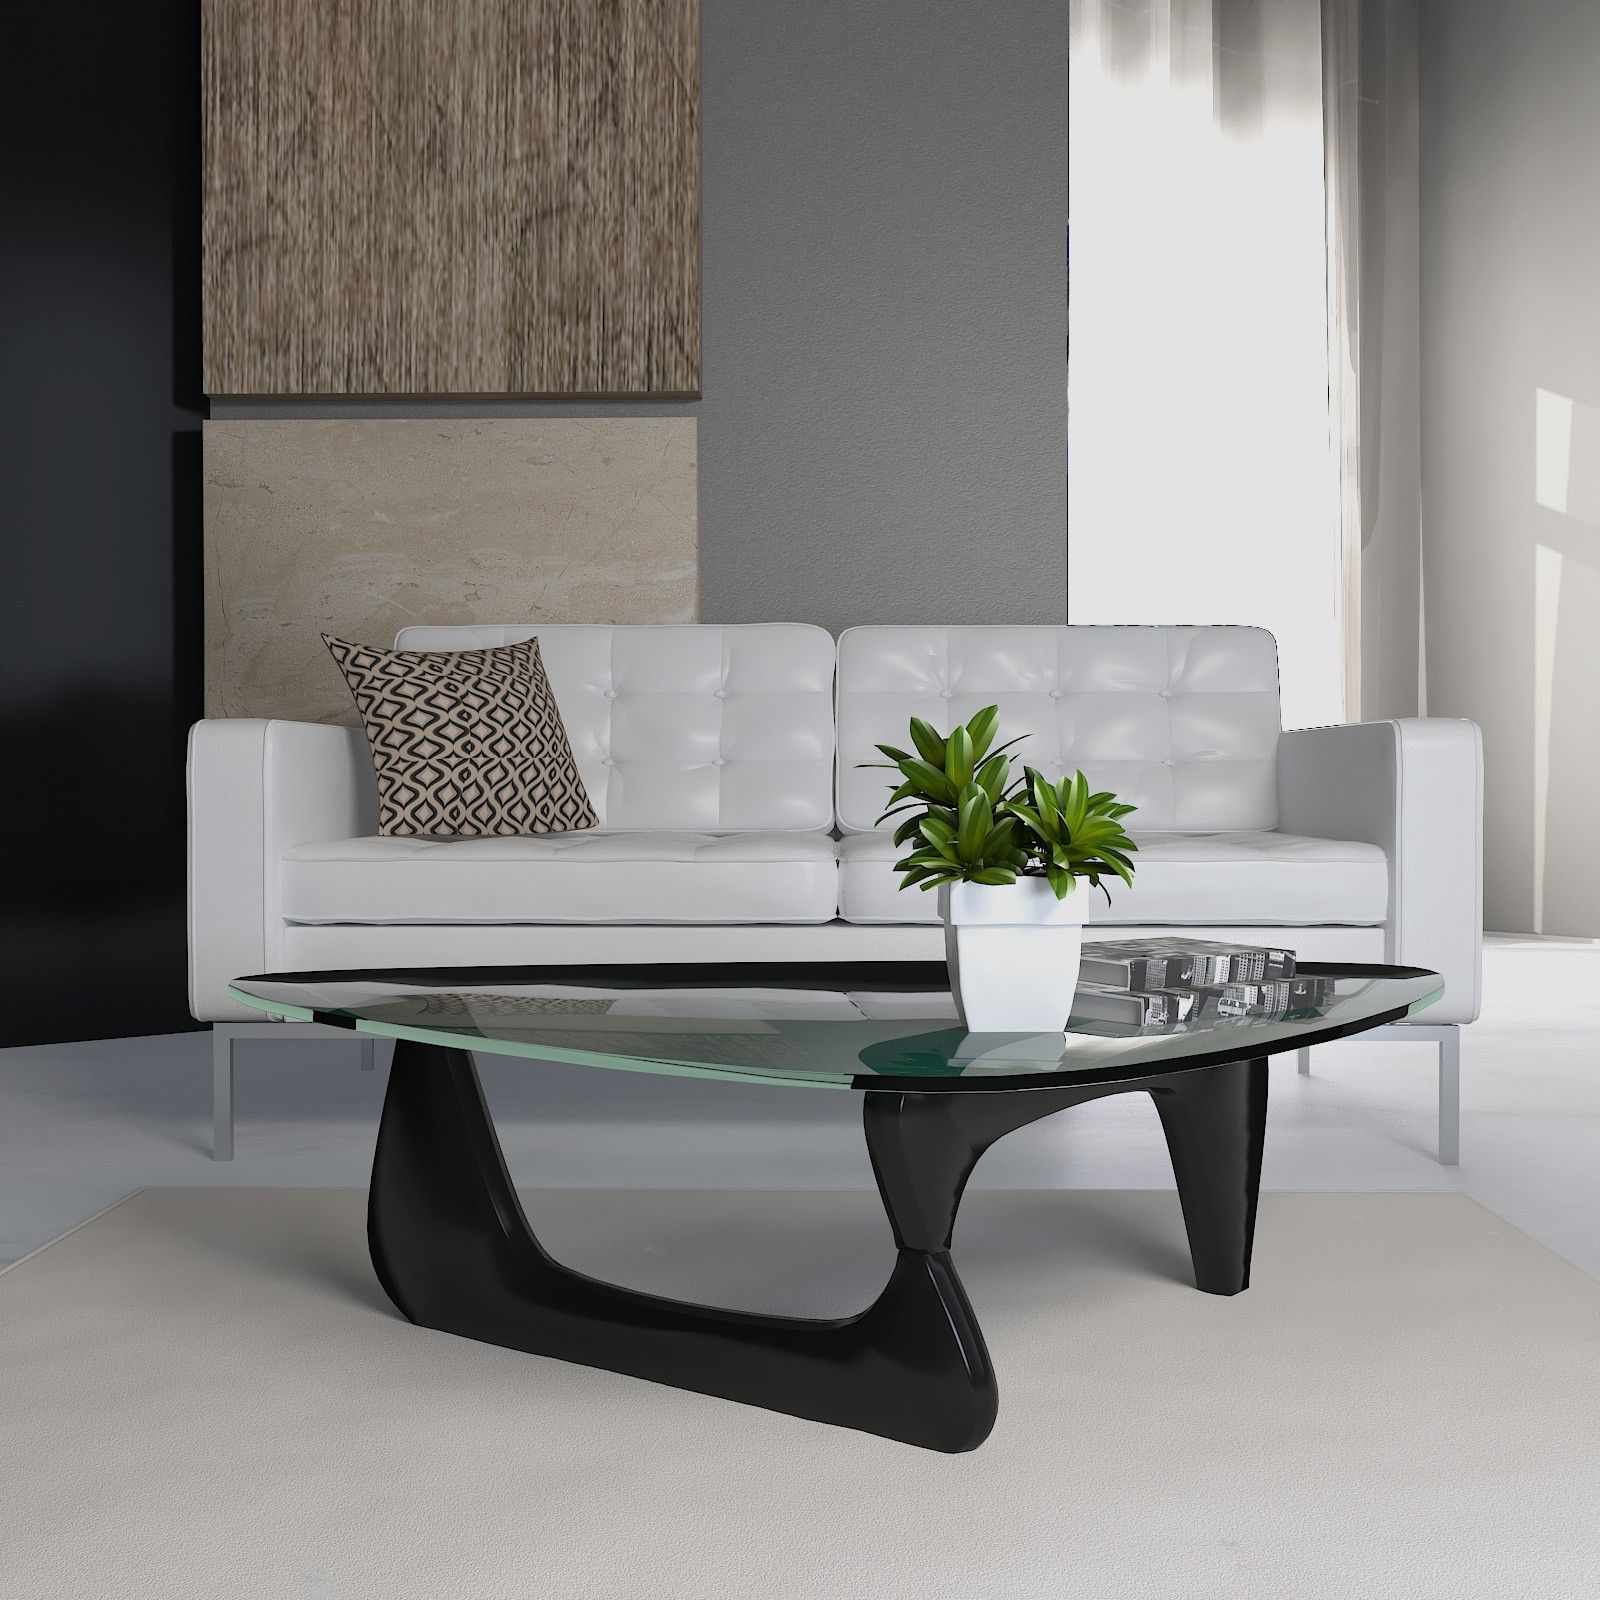 Isamu Noguchi Coffee Table – Glass With Black Wood Base Inside Preferred Espresso Wood And Glass Top Coffee Tables (View 12 of 20)